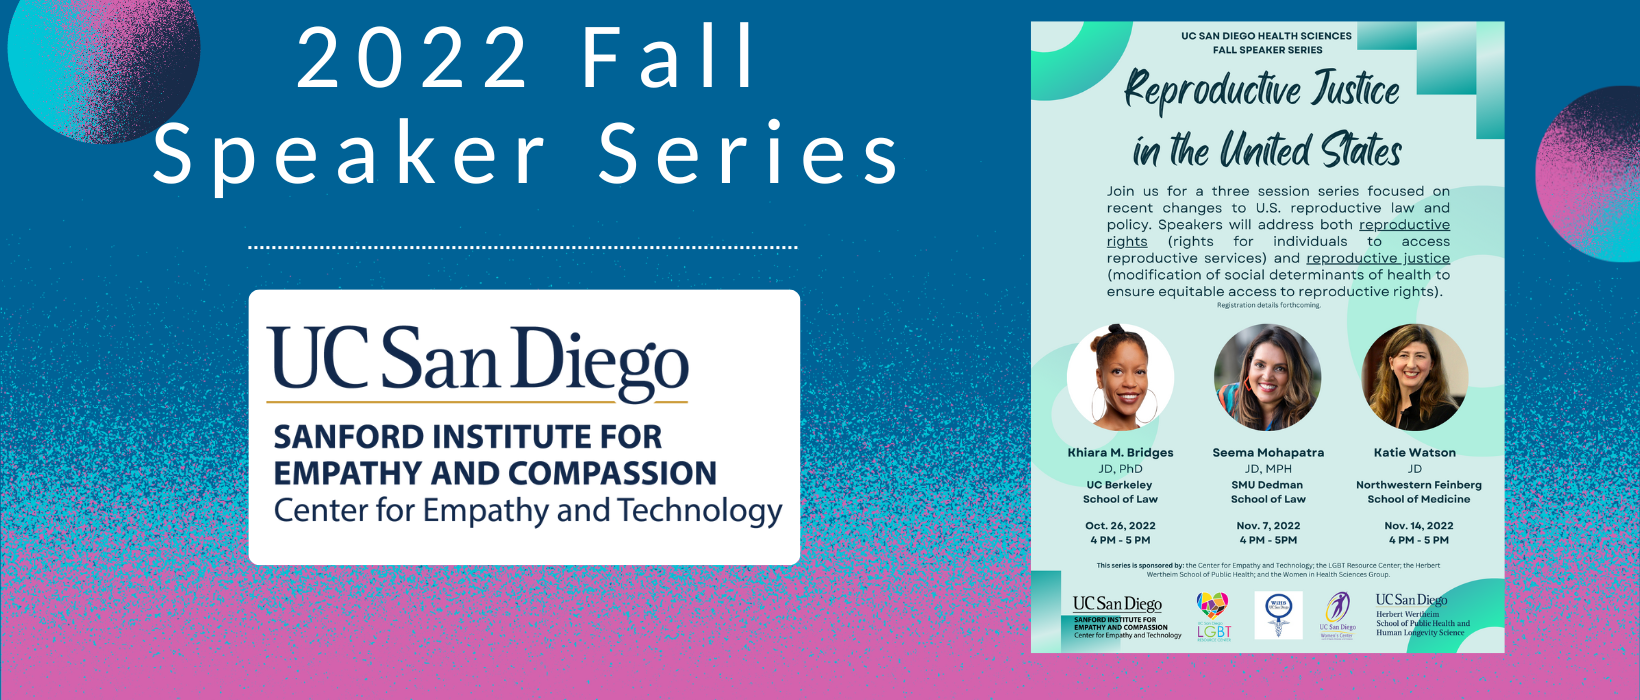 6 of 7, The UC San Diego Center for Empathy and Compassion logo appears blow the words 2022 Fall Speaker Series. To the right is a picture of the recruitment flyer for the series, showing all three series speakers: Khiara M. Bridges, Seema Mohapatra, and Katie Watson. The series is titled Reproductive Justice in the United States and states "Join us for a three session series focused on recent changes to U.S. reproductive law and policy. Speakers will address both reproductive rights (rights for individuals to access reproductive services) and reproductive justice (modification of social determinants of health to ensure equitable access to reproductive rights). 